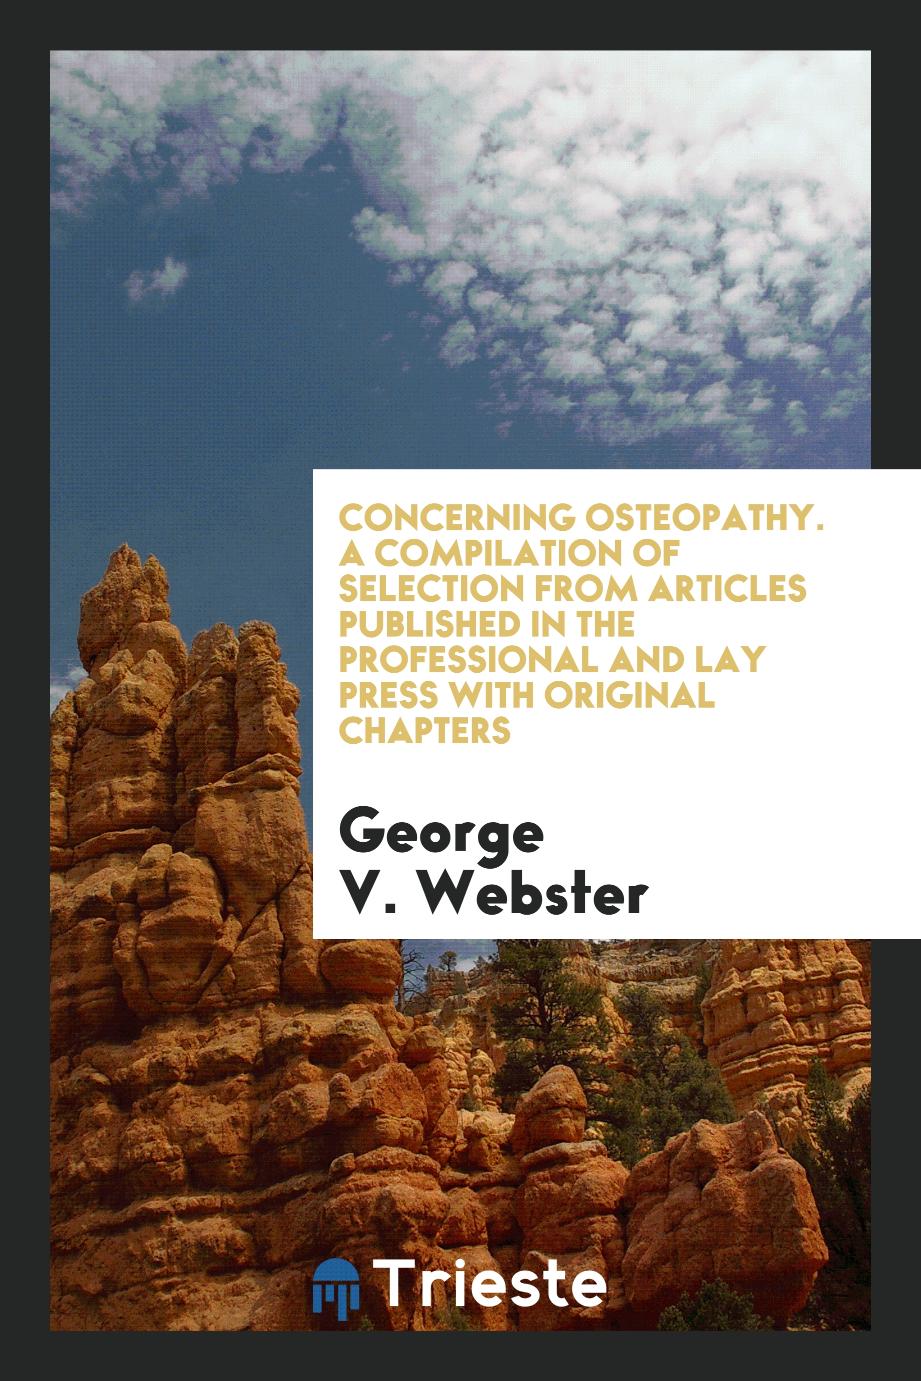 Concerning Osteopathy. A Compilation of Selection from Articles Published in the Professional and Lay Press with Original Chapters